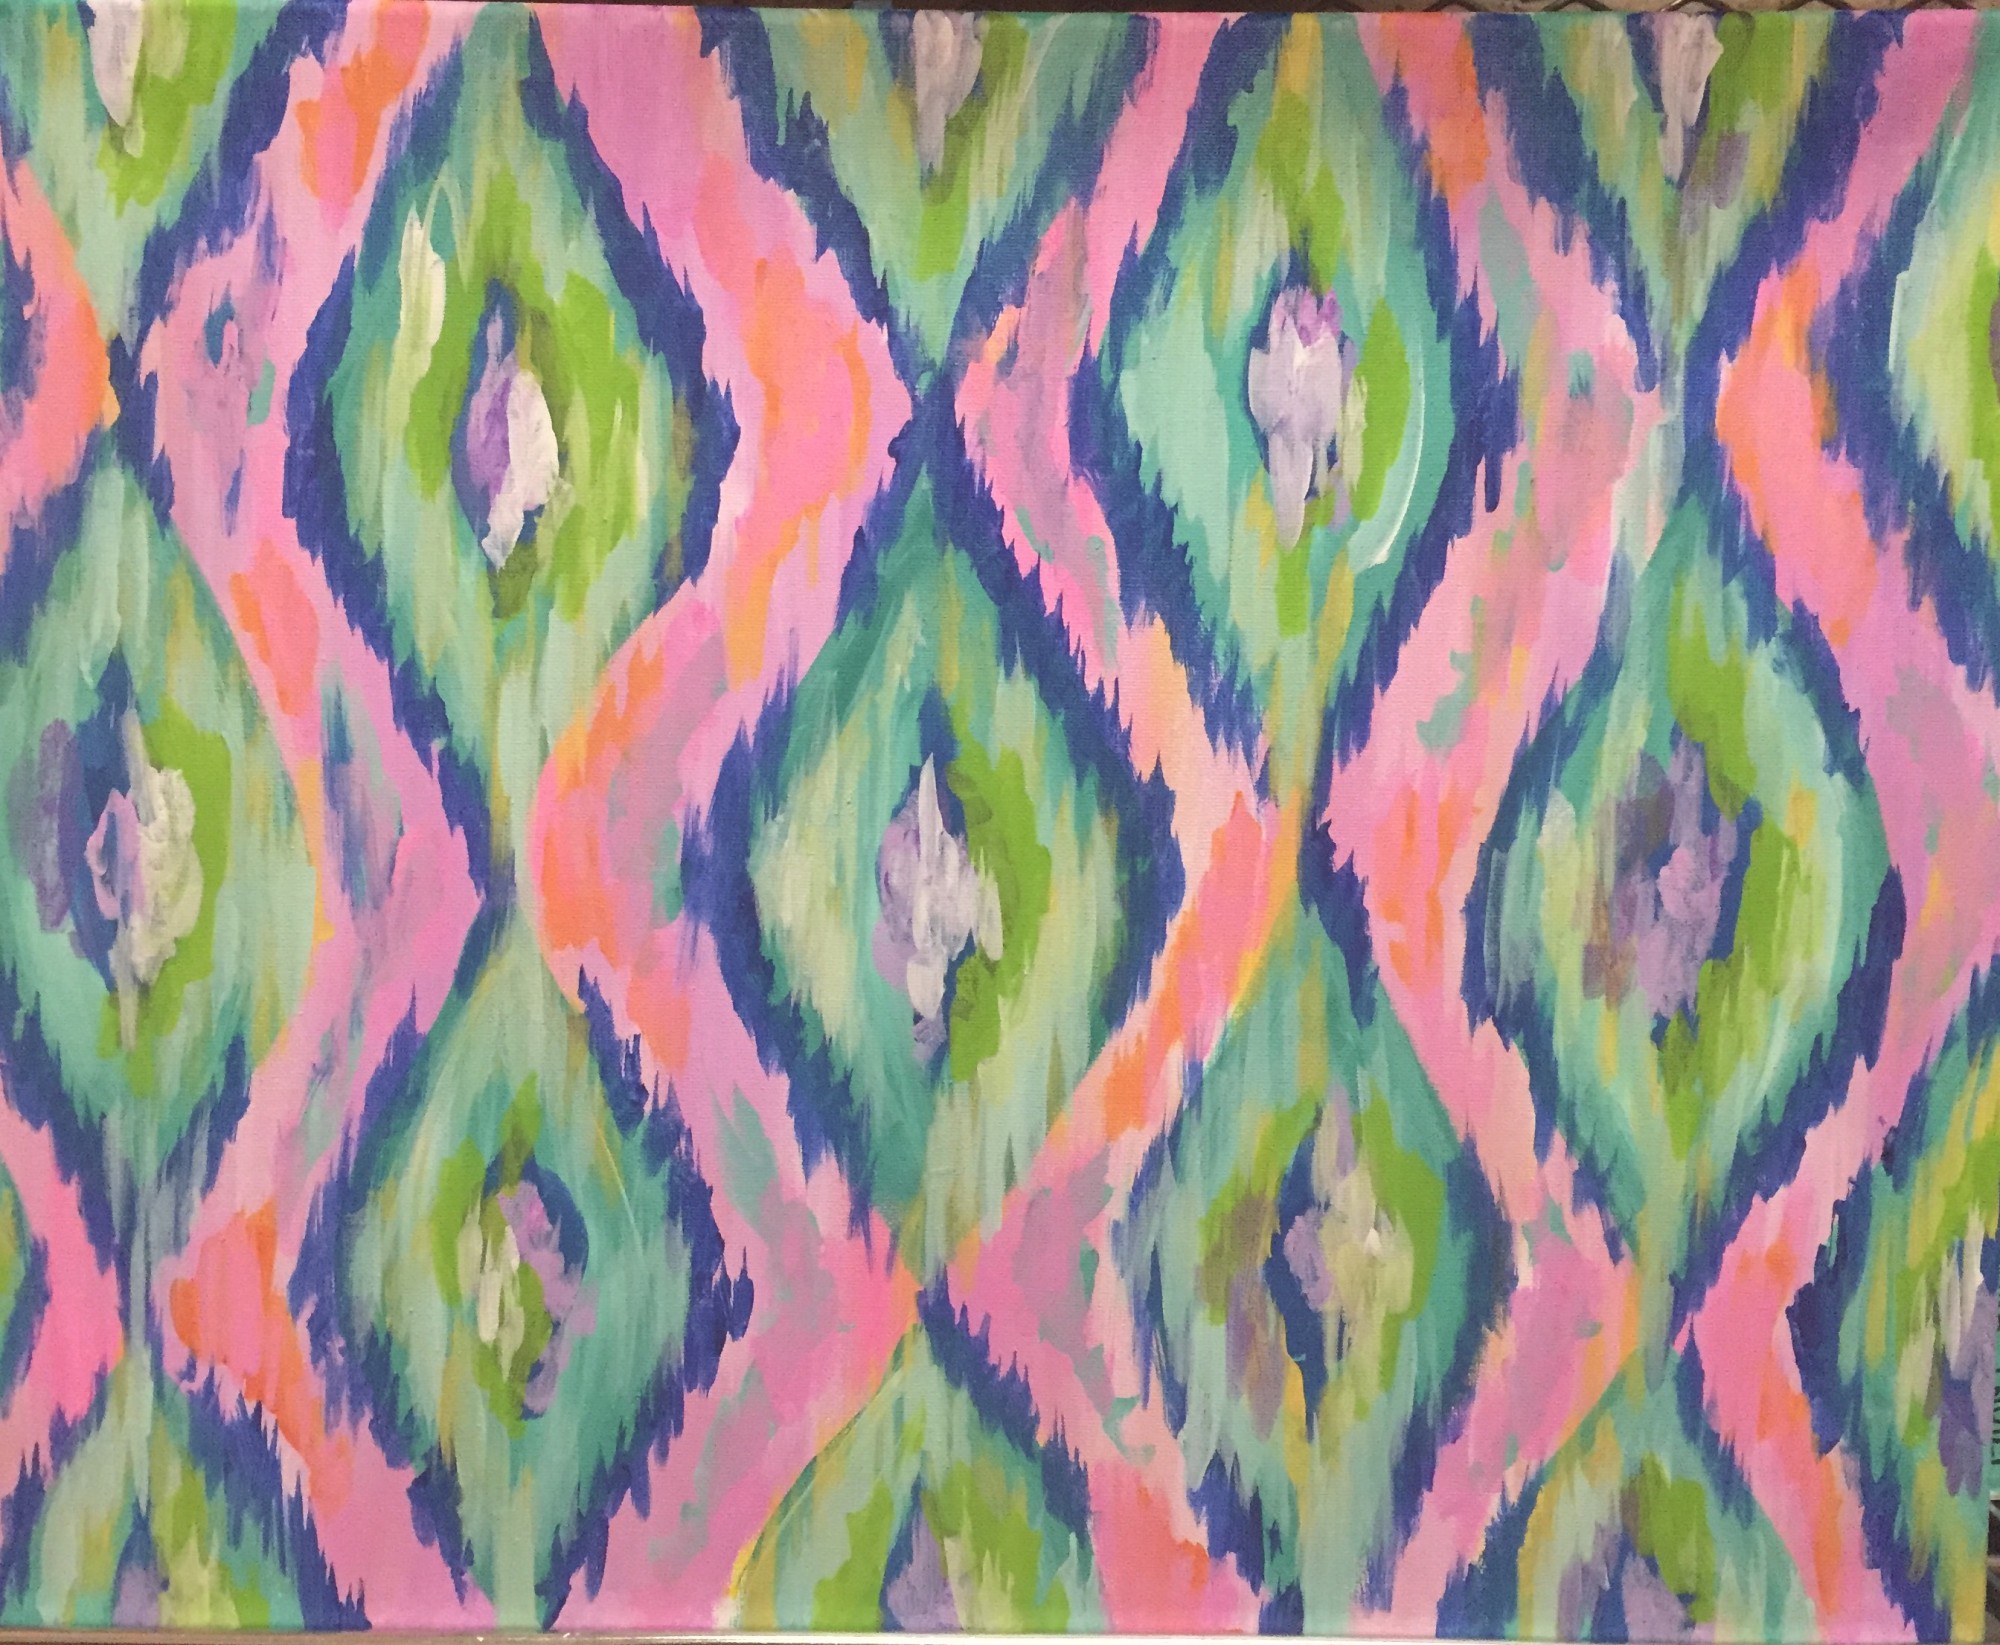 Ikat Abstract - CREATE YOUR OWN - EGR Gaslight Village Location 